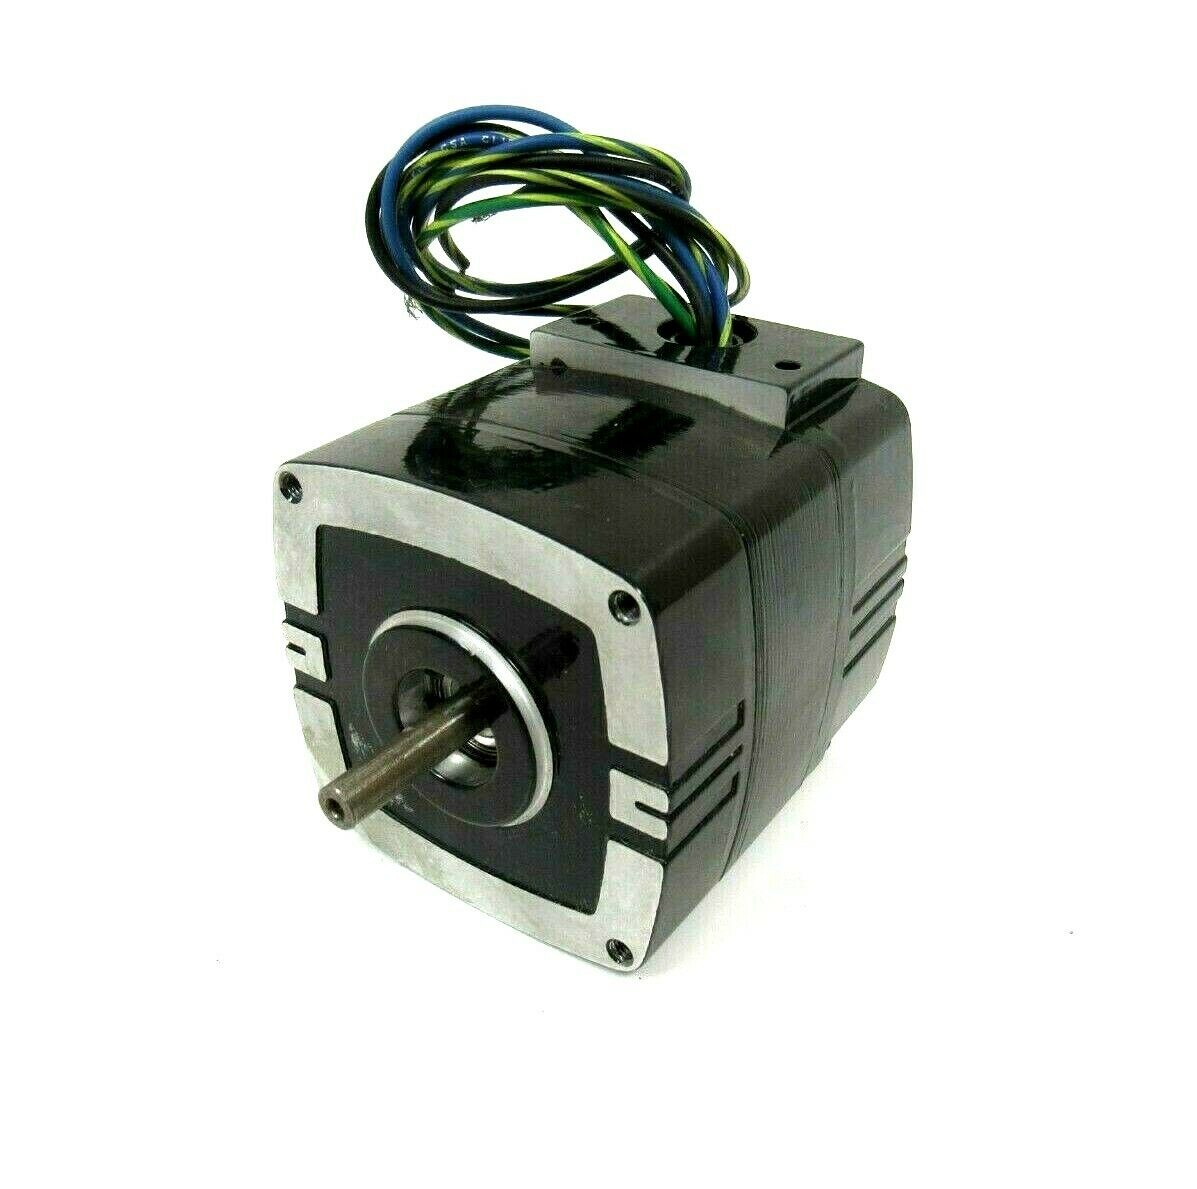 Details about   BODINE 30R2BECI SMALL MOTOR 1700 RPM 